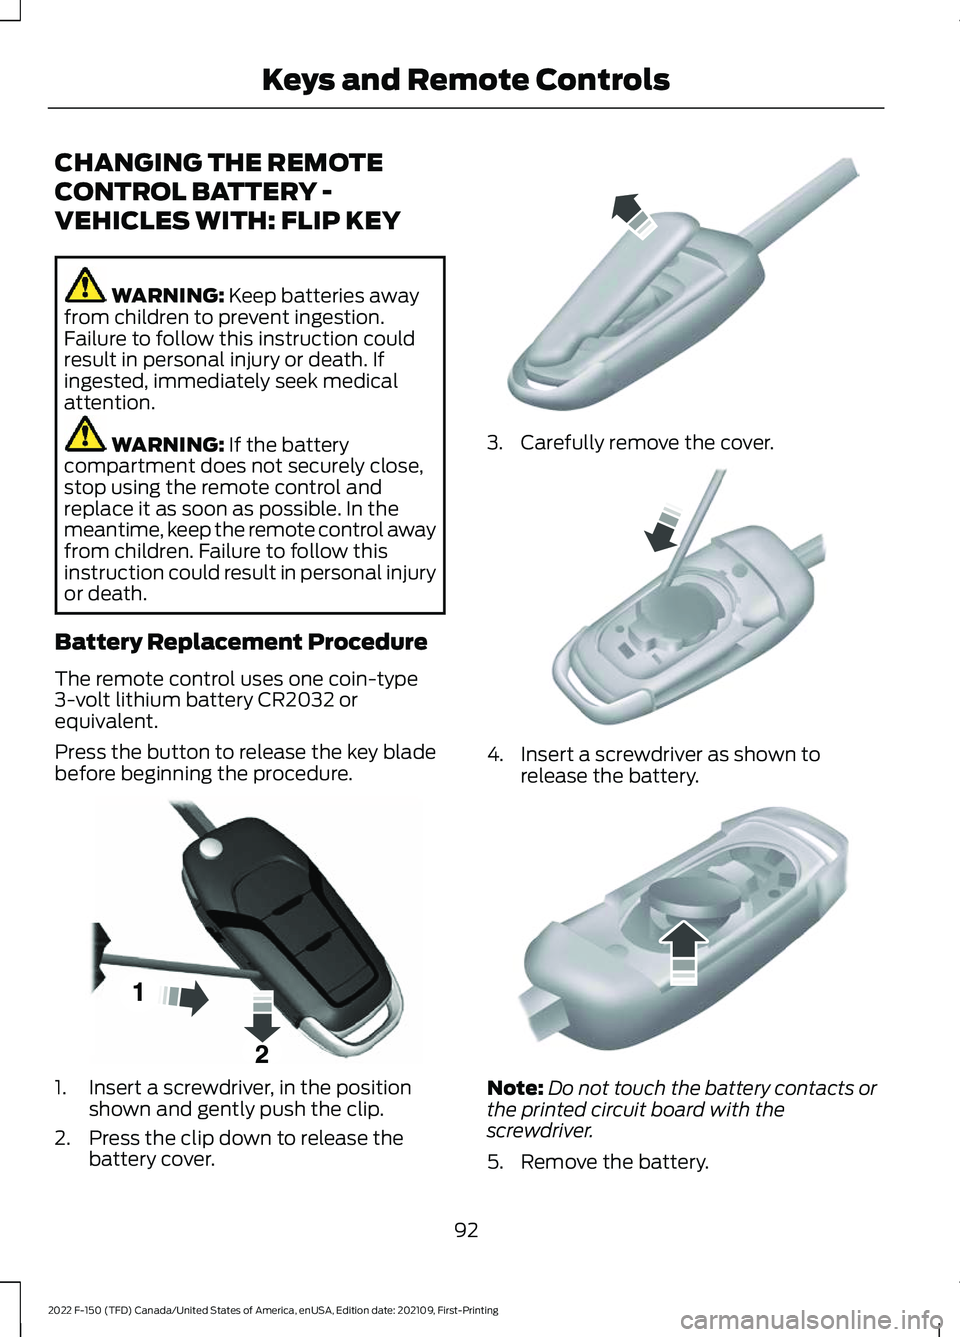 FORD F-150 2022  Owners Manual CHANGING THE REMOTE
CONTROL BATTERY -
VEHICLES WITH: FLIP KEY
WARNING: Keep batteries away
from children to prevent ingestion.
Failure to follow this instruction could
result in personal injury or dea